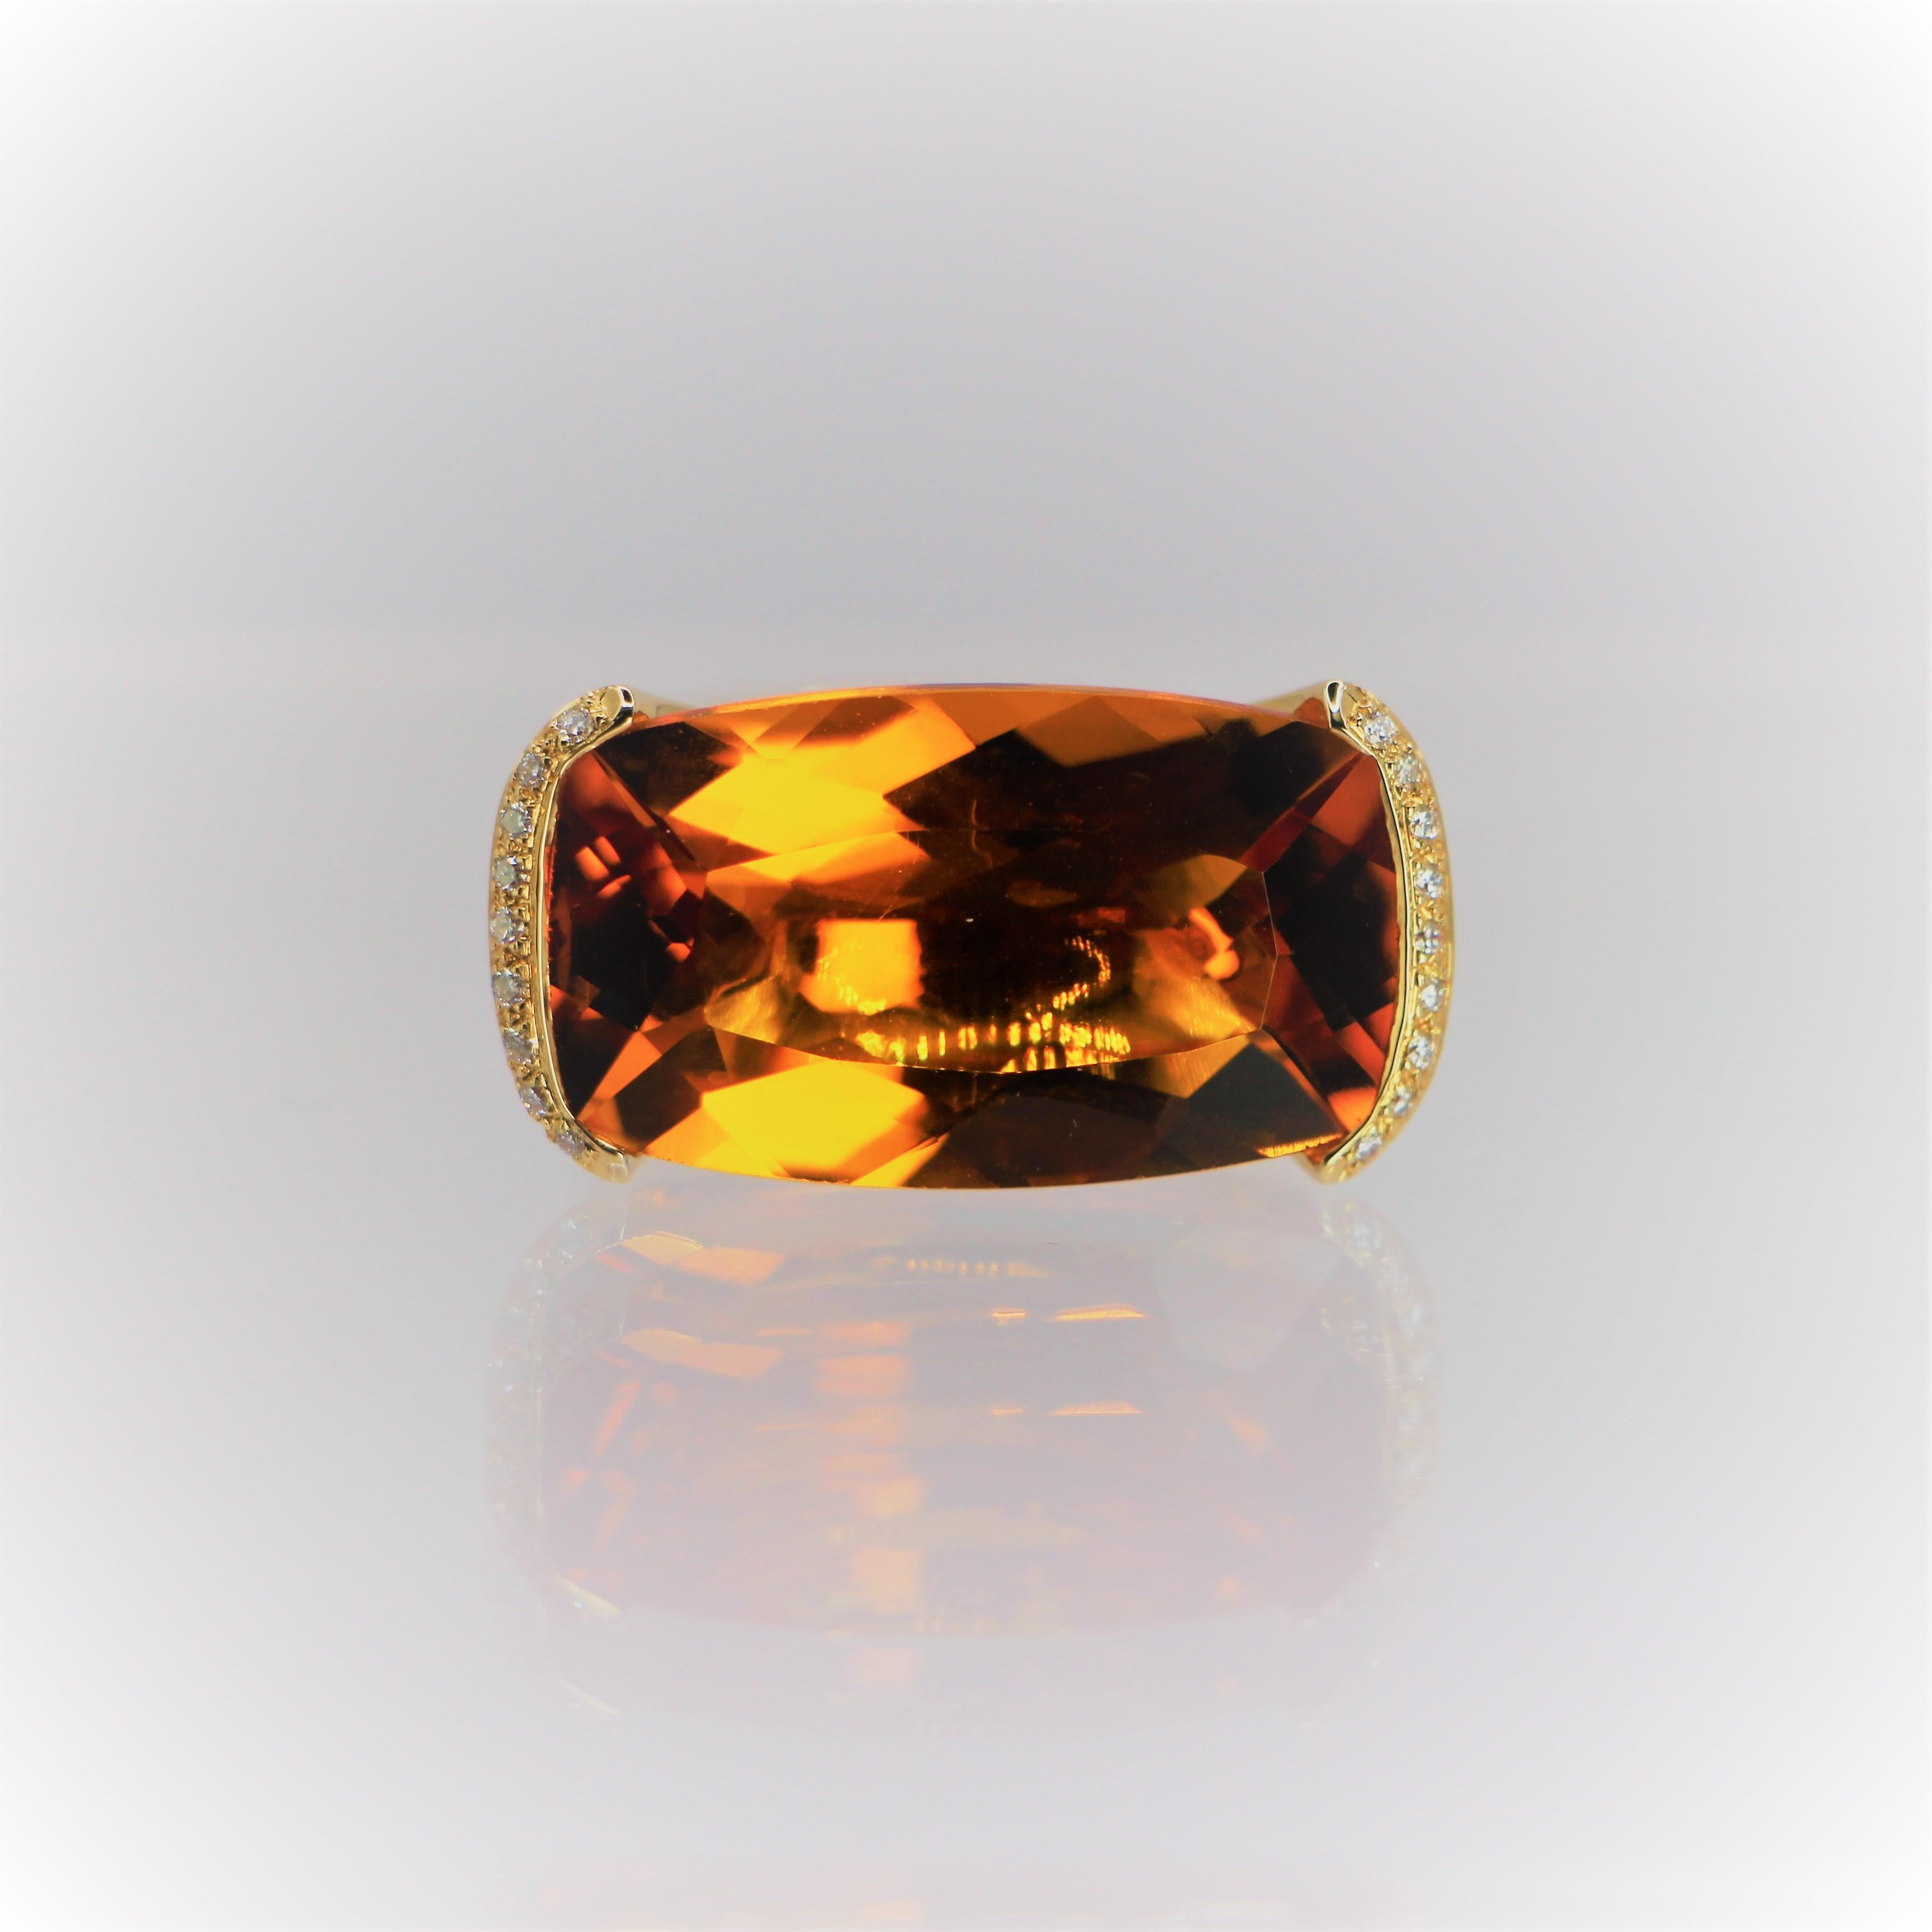 Orange Citrine with Rectangular mix Cut, a Statement Ring in 18Kt  Yellow Gold with Diamonds brilliant cut.
The central stone is a rare orange Citrine 22.6 ct rectangular cut, In the two edges of the stone, two bars with diamonds brilliant cut in